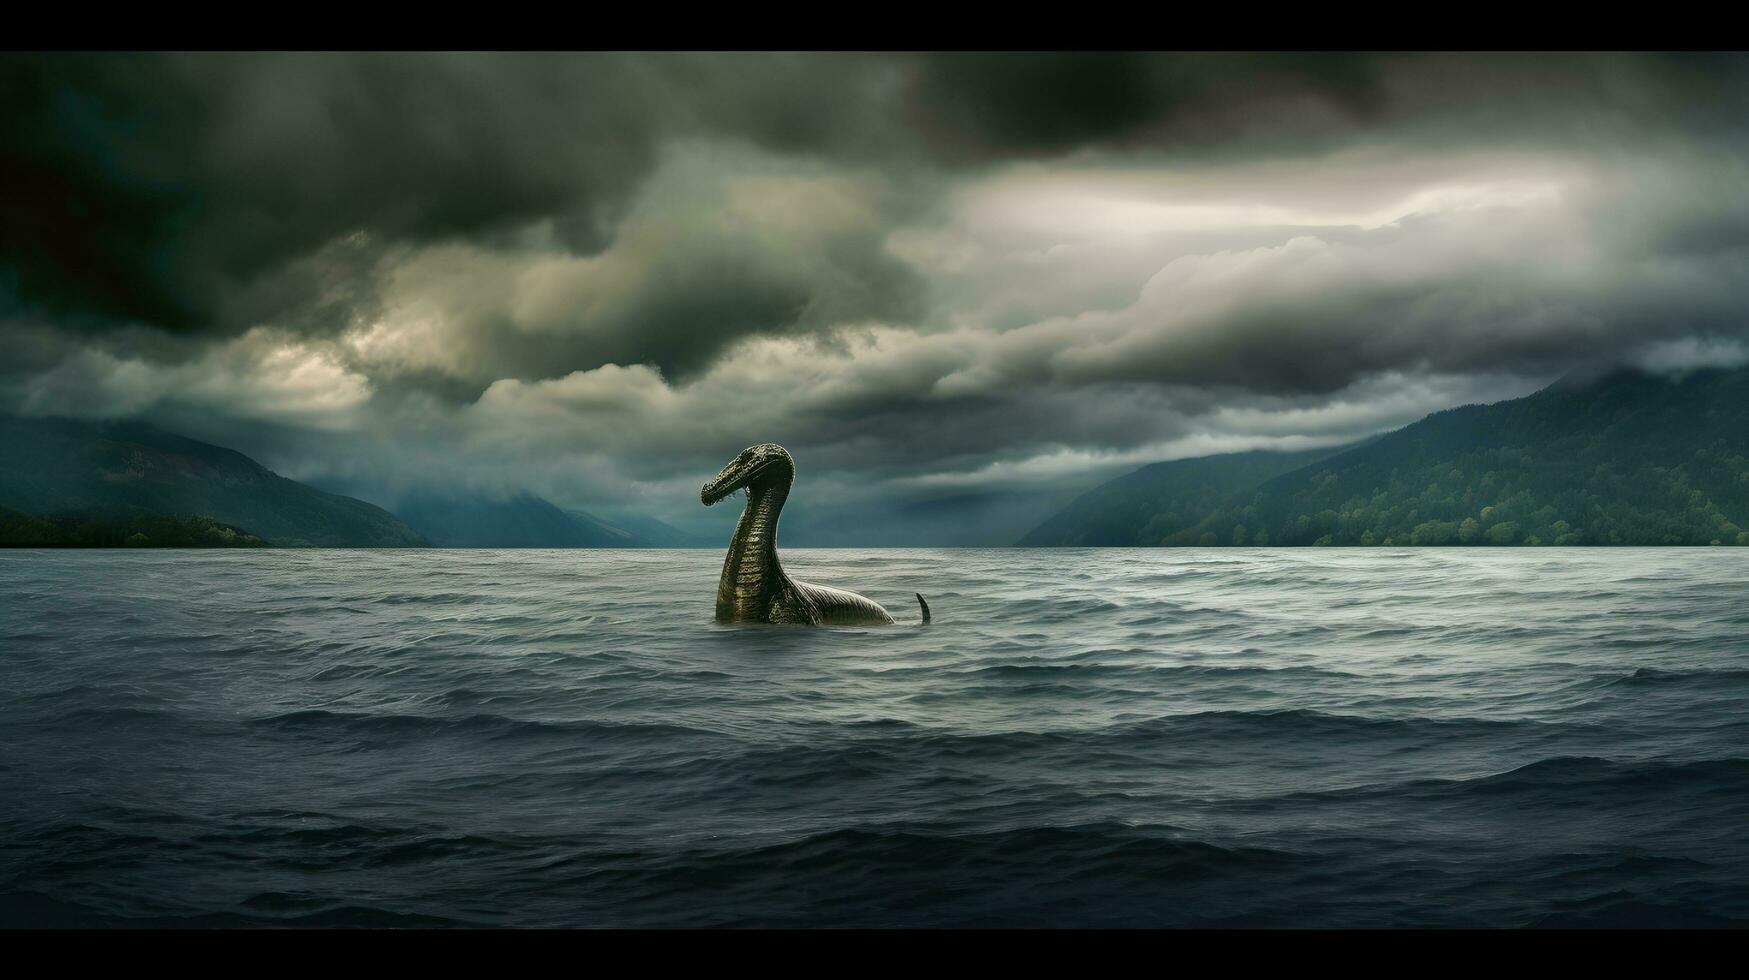 Nessie, the famed lake monster of Loch Ness in Scotland photo